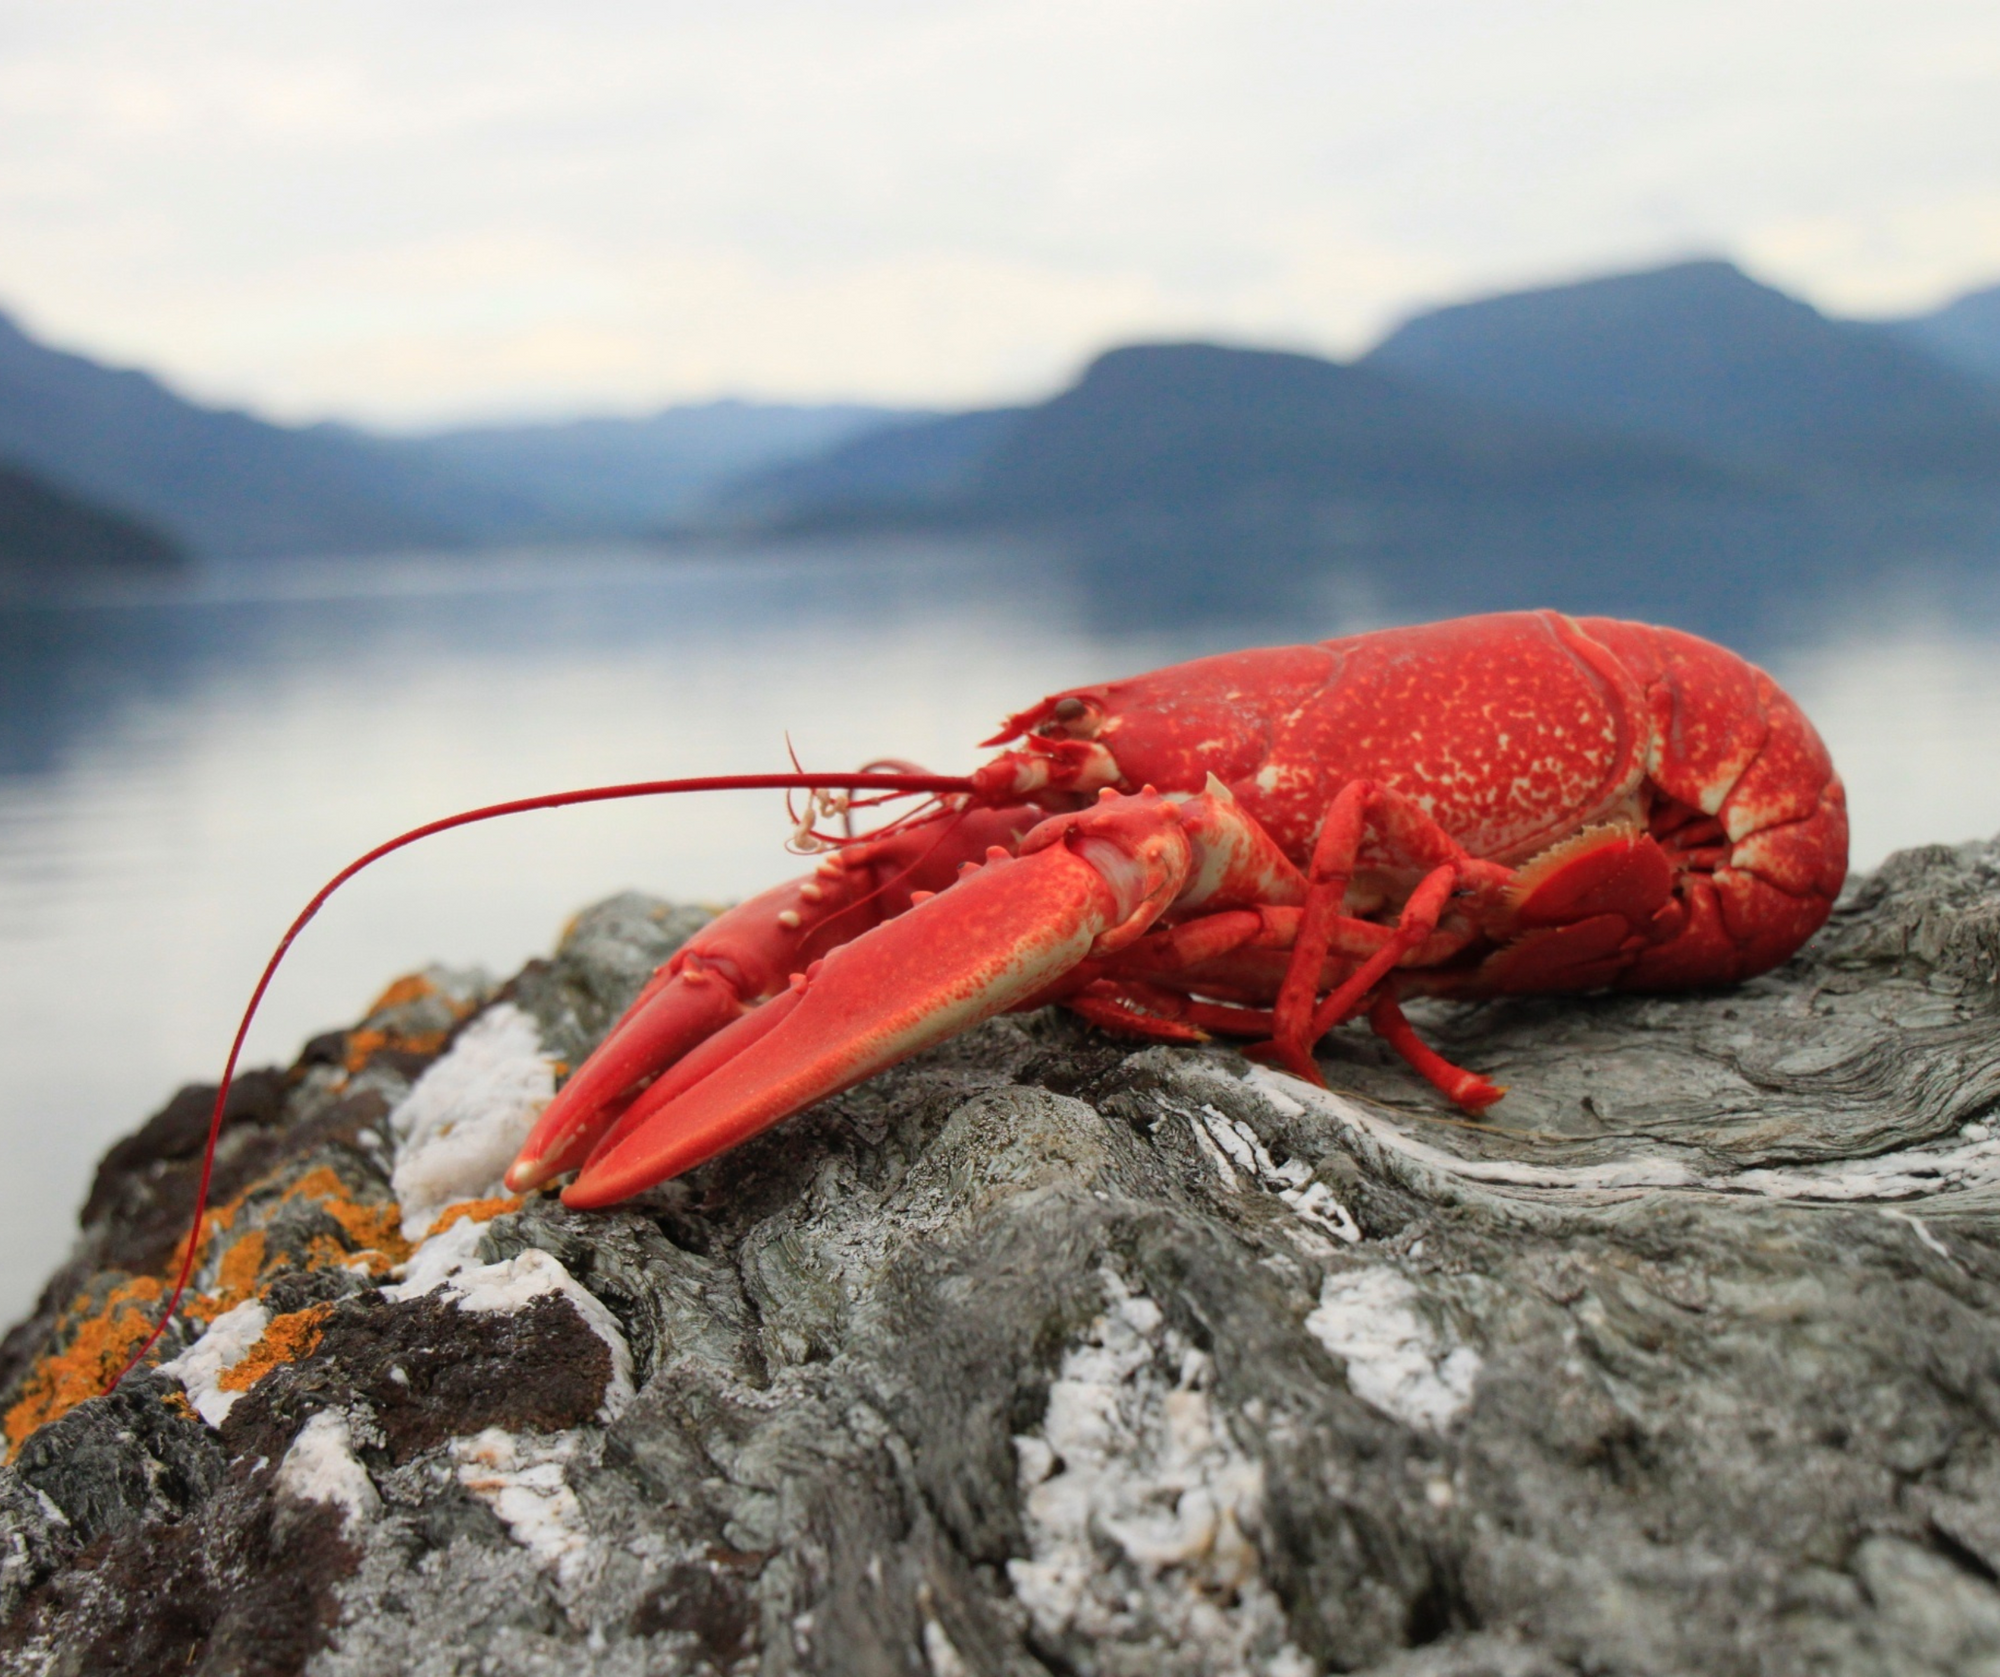 Sustained Demand in the US for King and Snow Crab Defies Overall Seafood Sales Decline